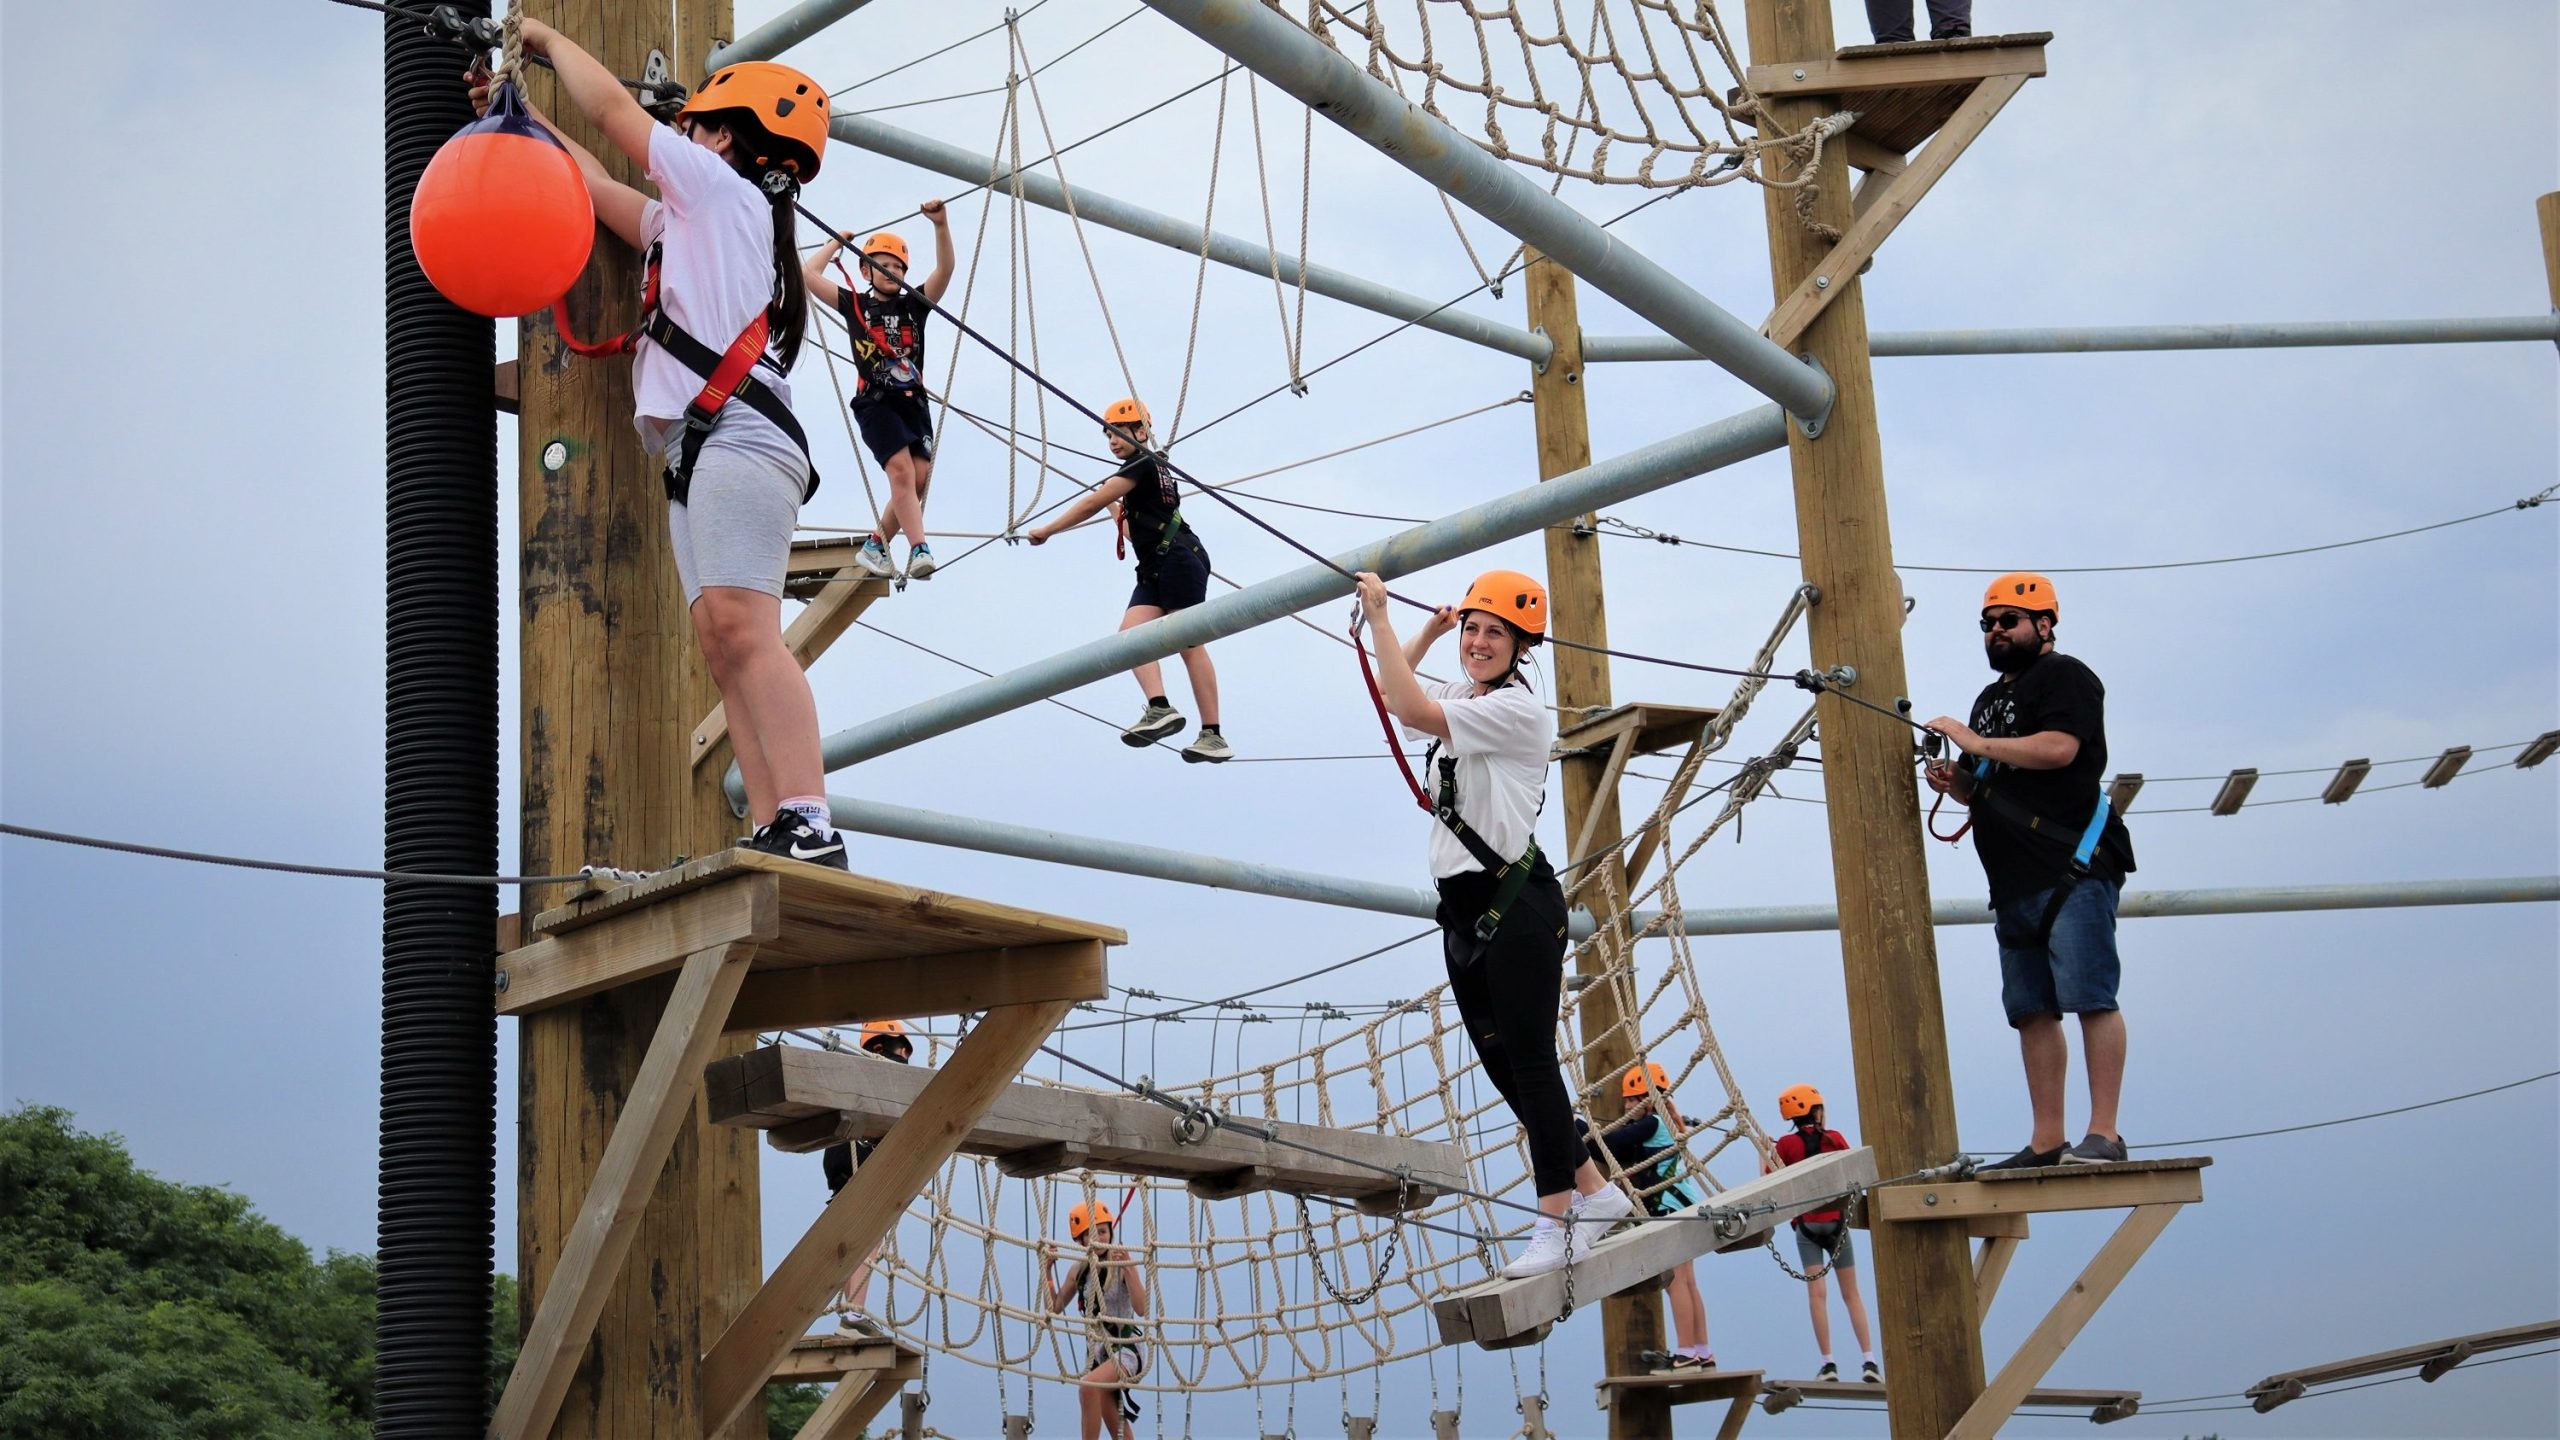 High Ropes course